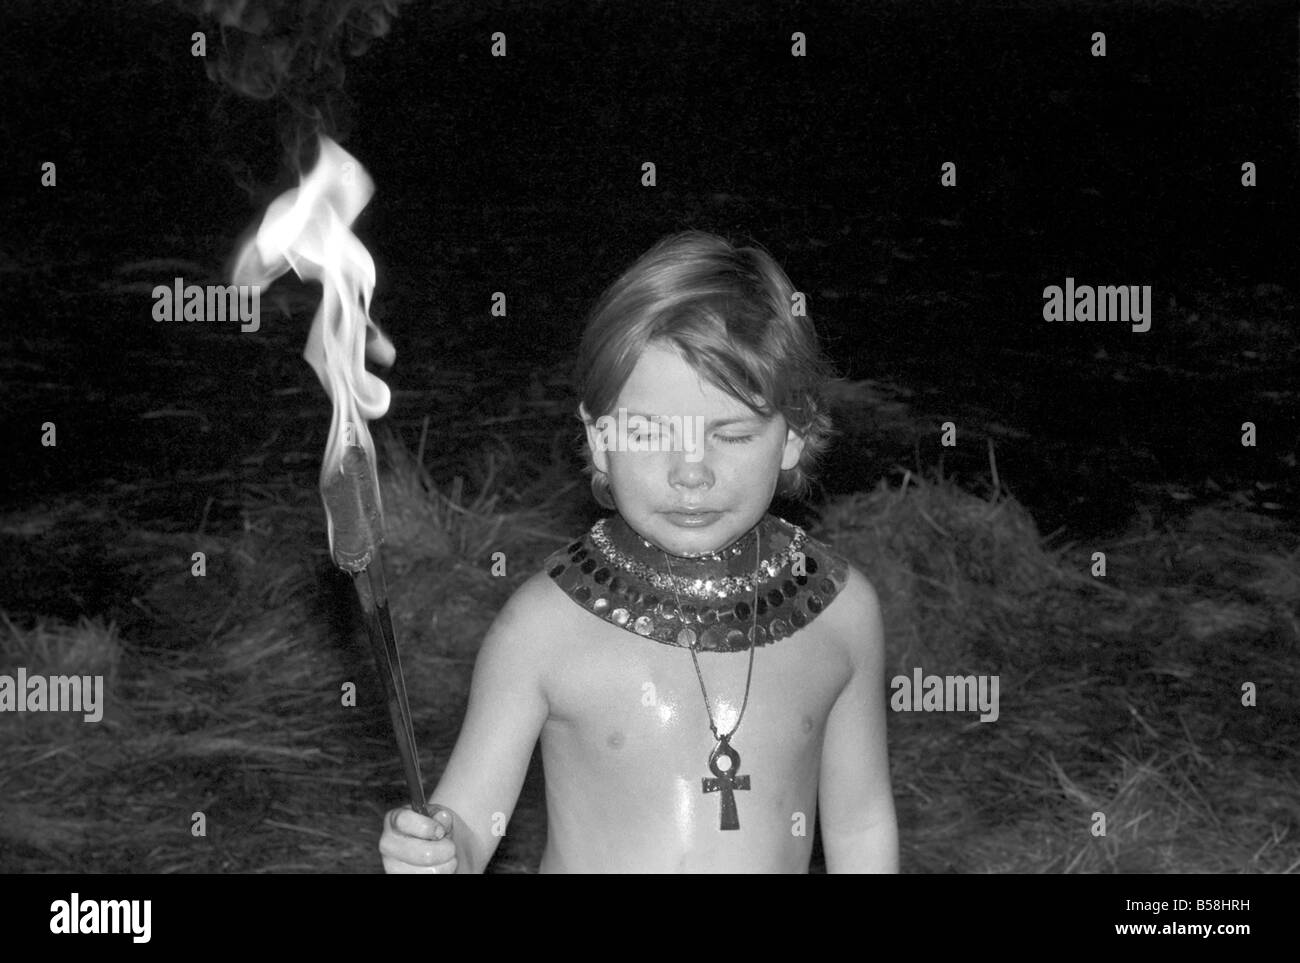 Unusual: Children. Fire Eater. 9 year old Tony Walls. December 1976 76-07502-009 Stock Photo